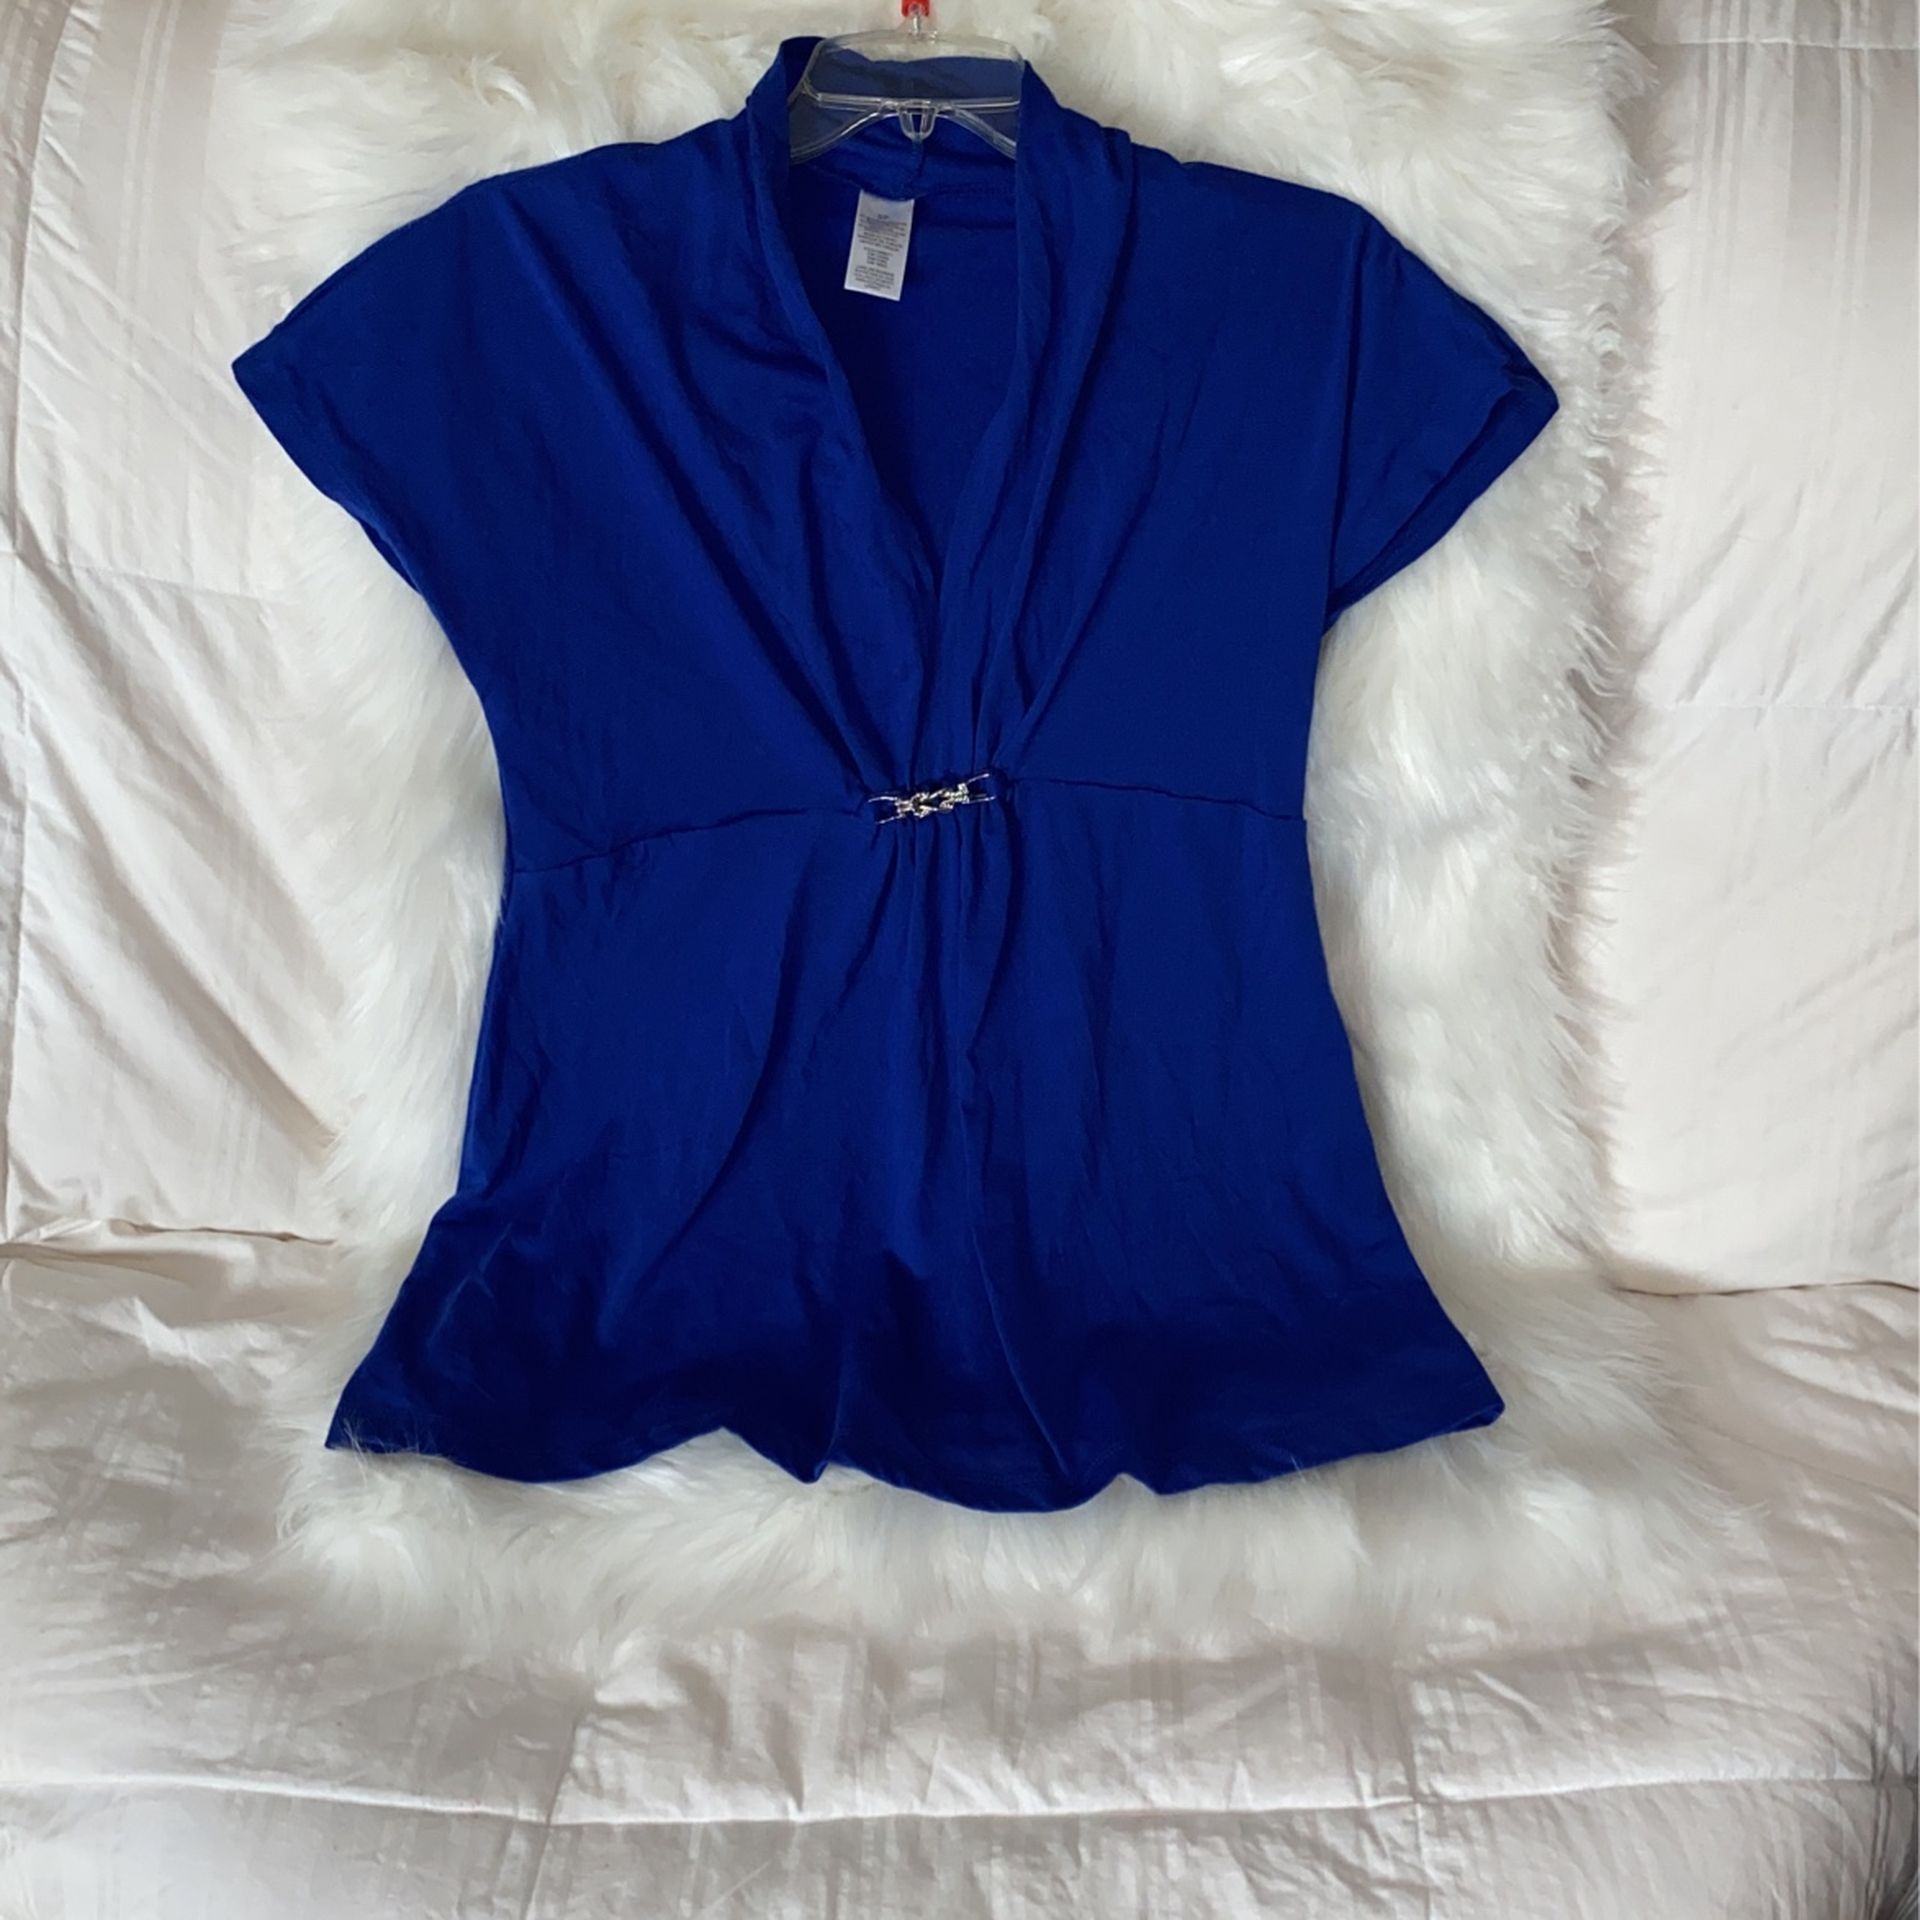 Cute Royal Blue Tunic Top Small For Women